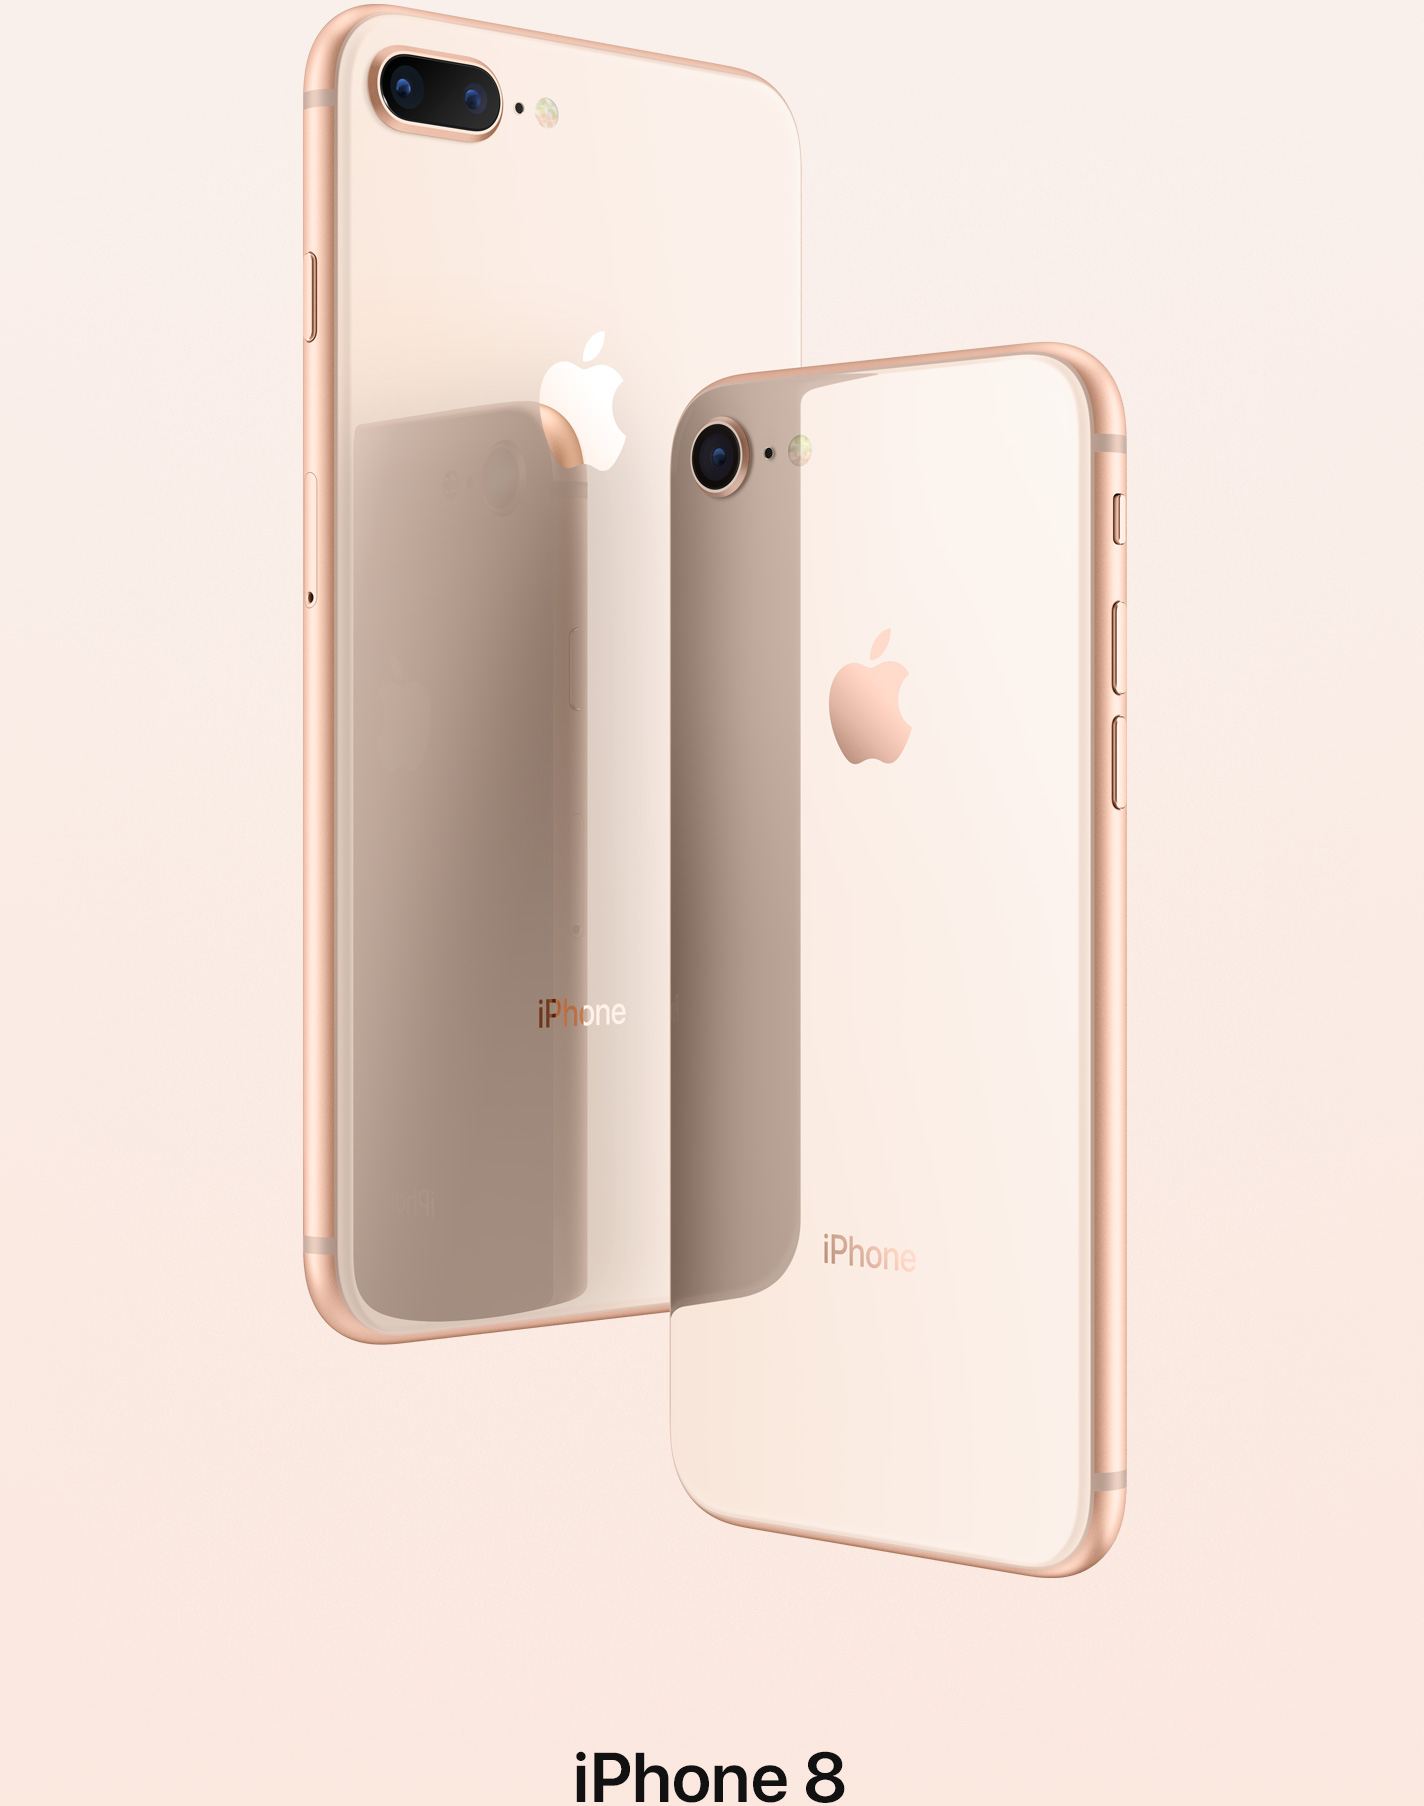 iPhone 8 - Available in space grey, silver and gold.